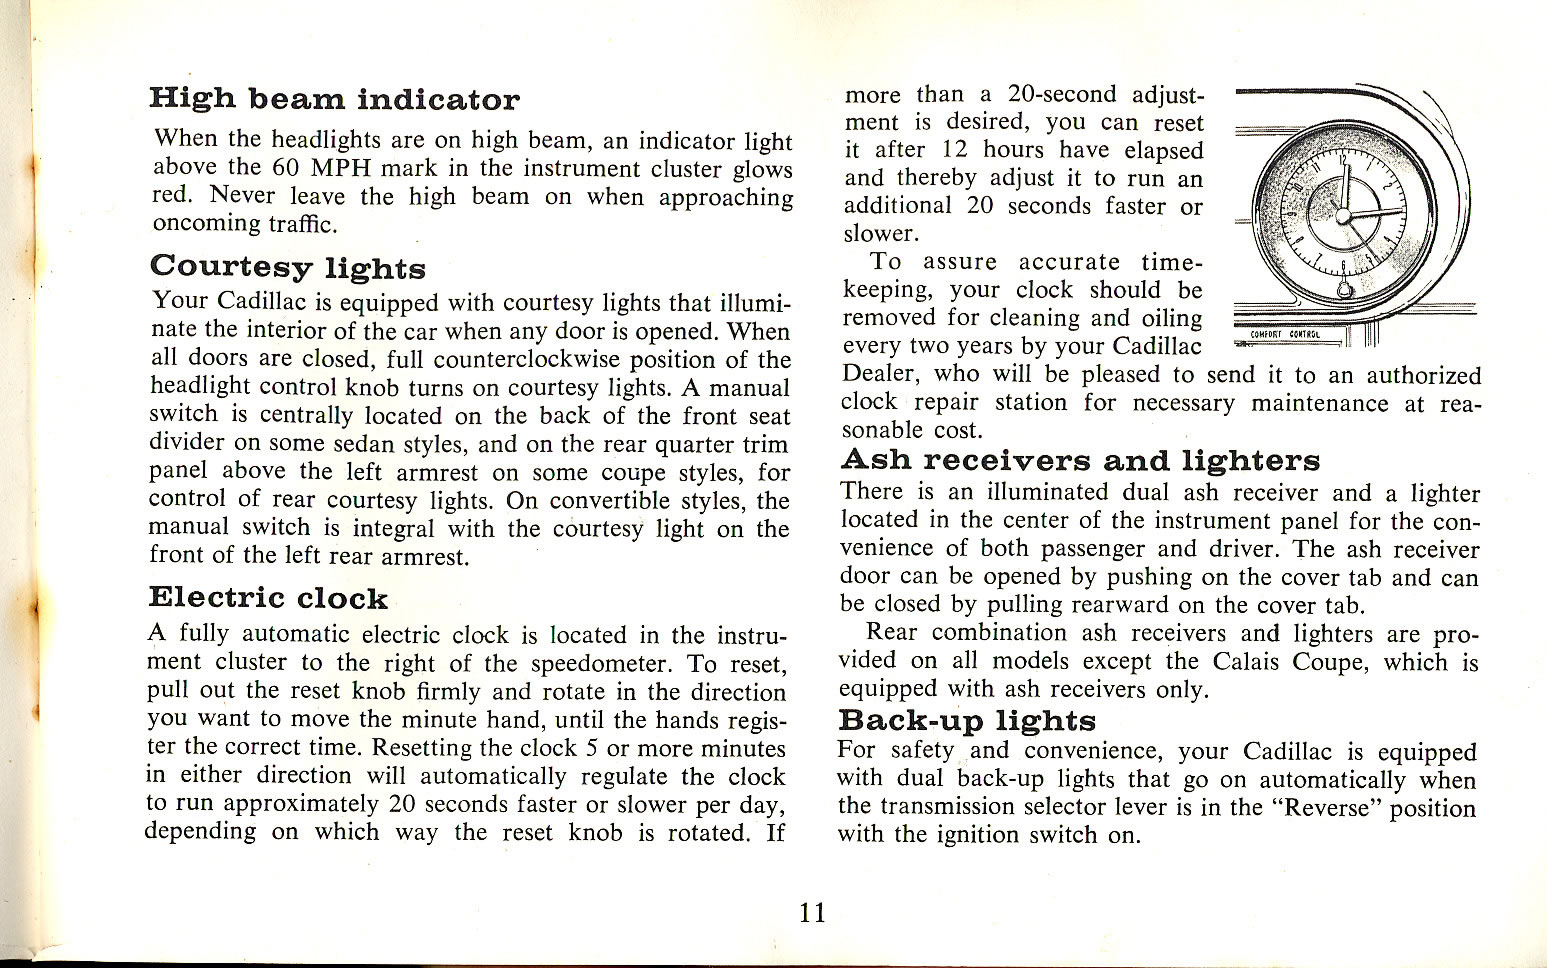 1965 Cadillac Owners Manual Page 34